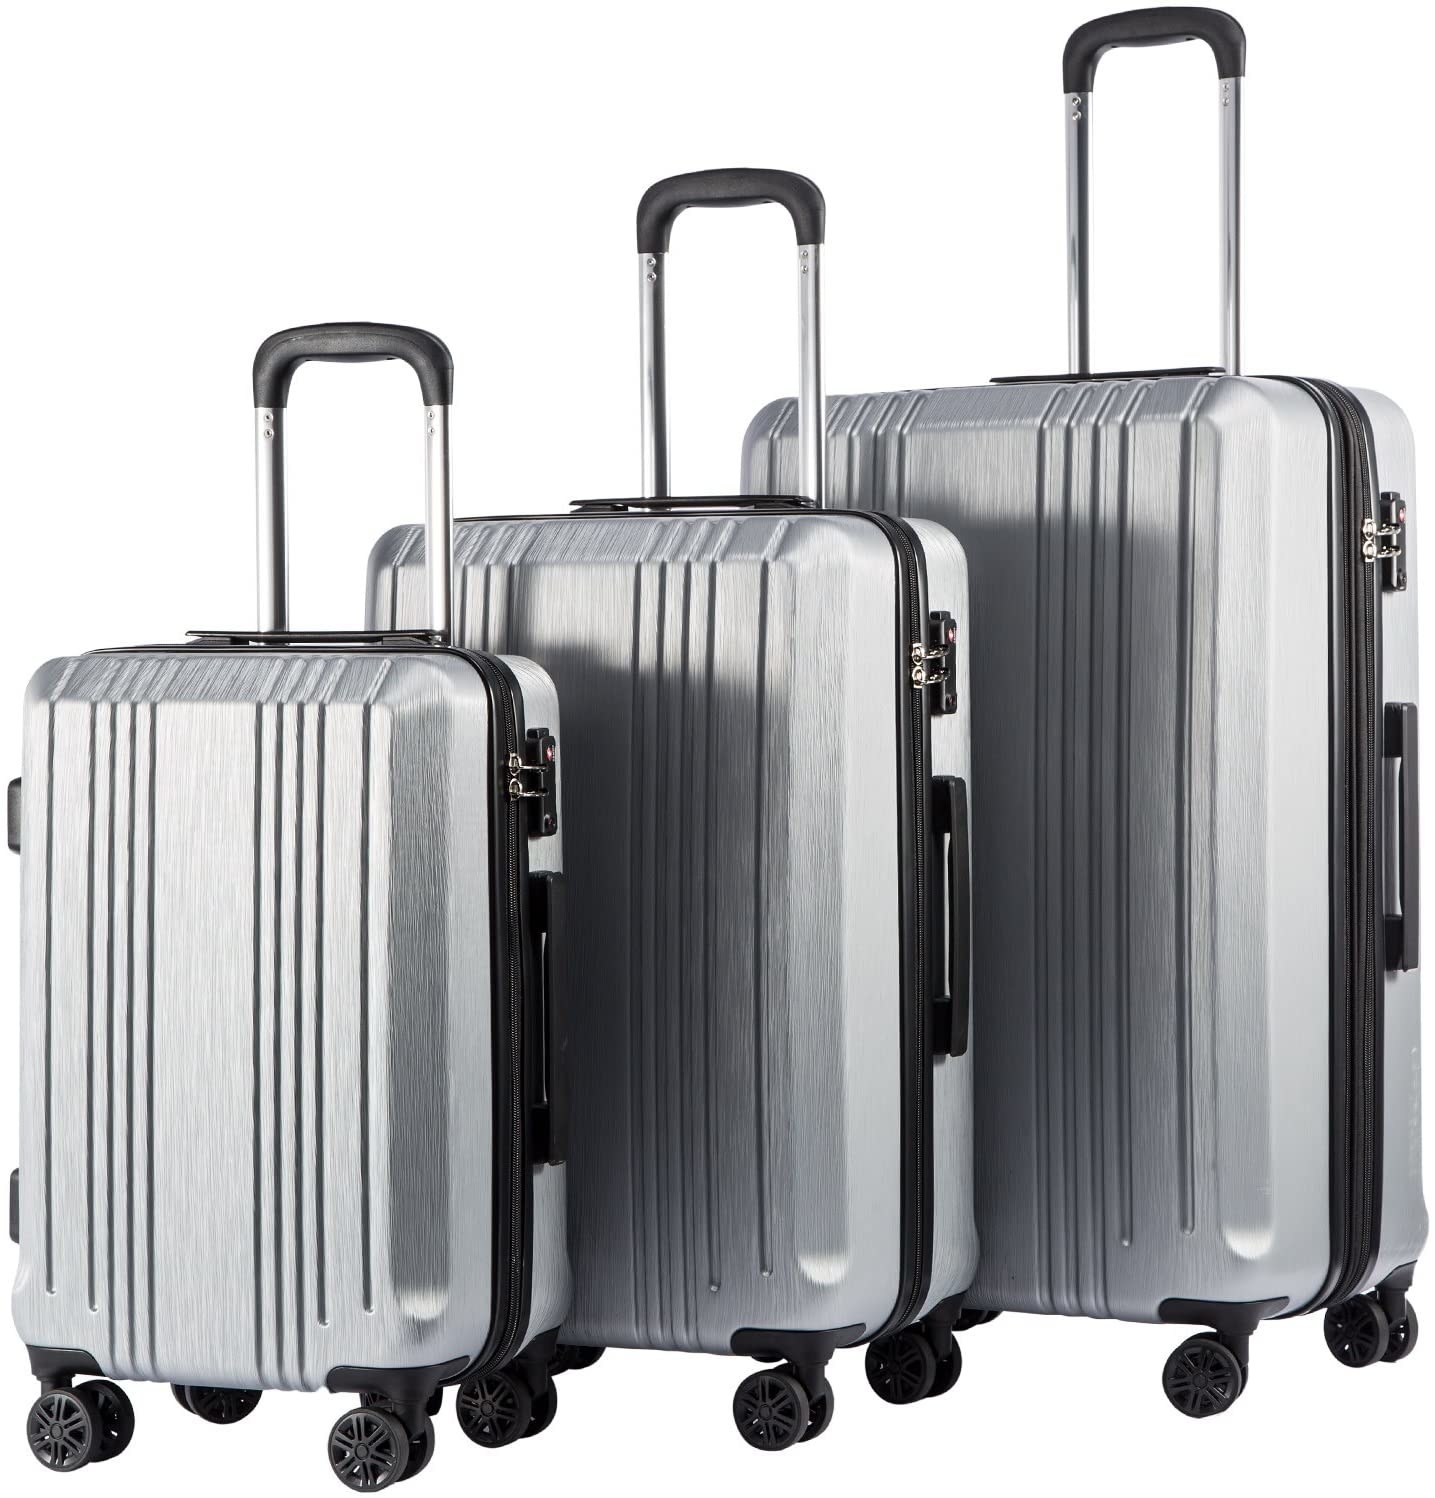 Three hard shell suitcases of various sizes